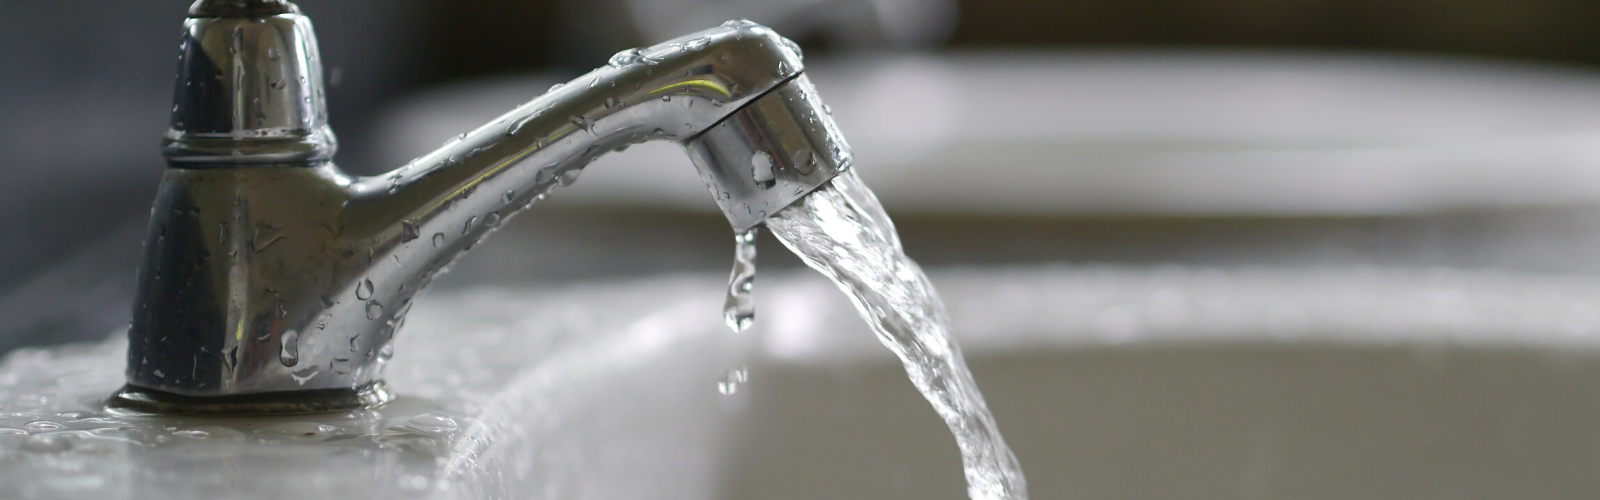 10 Ways to Save Water at Home